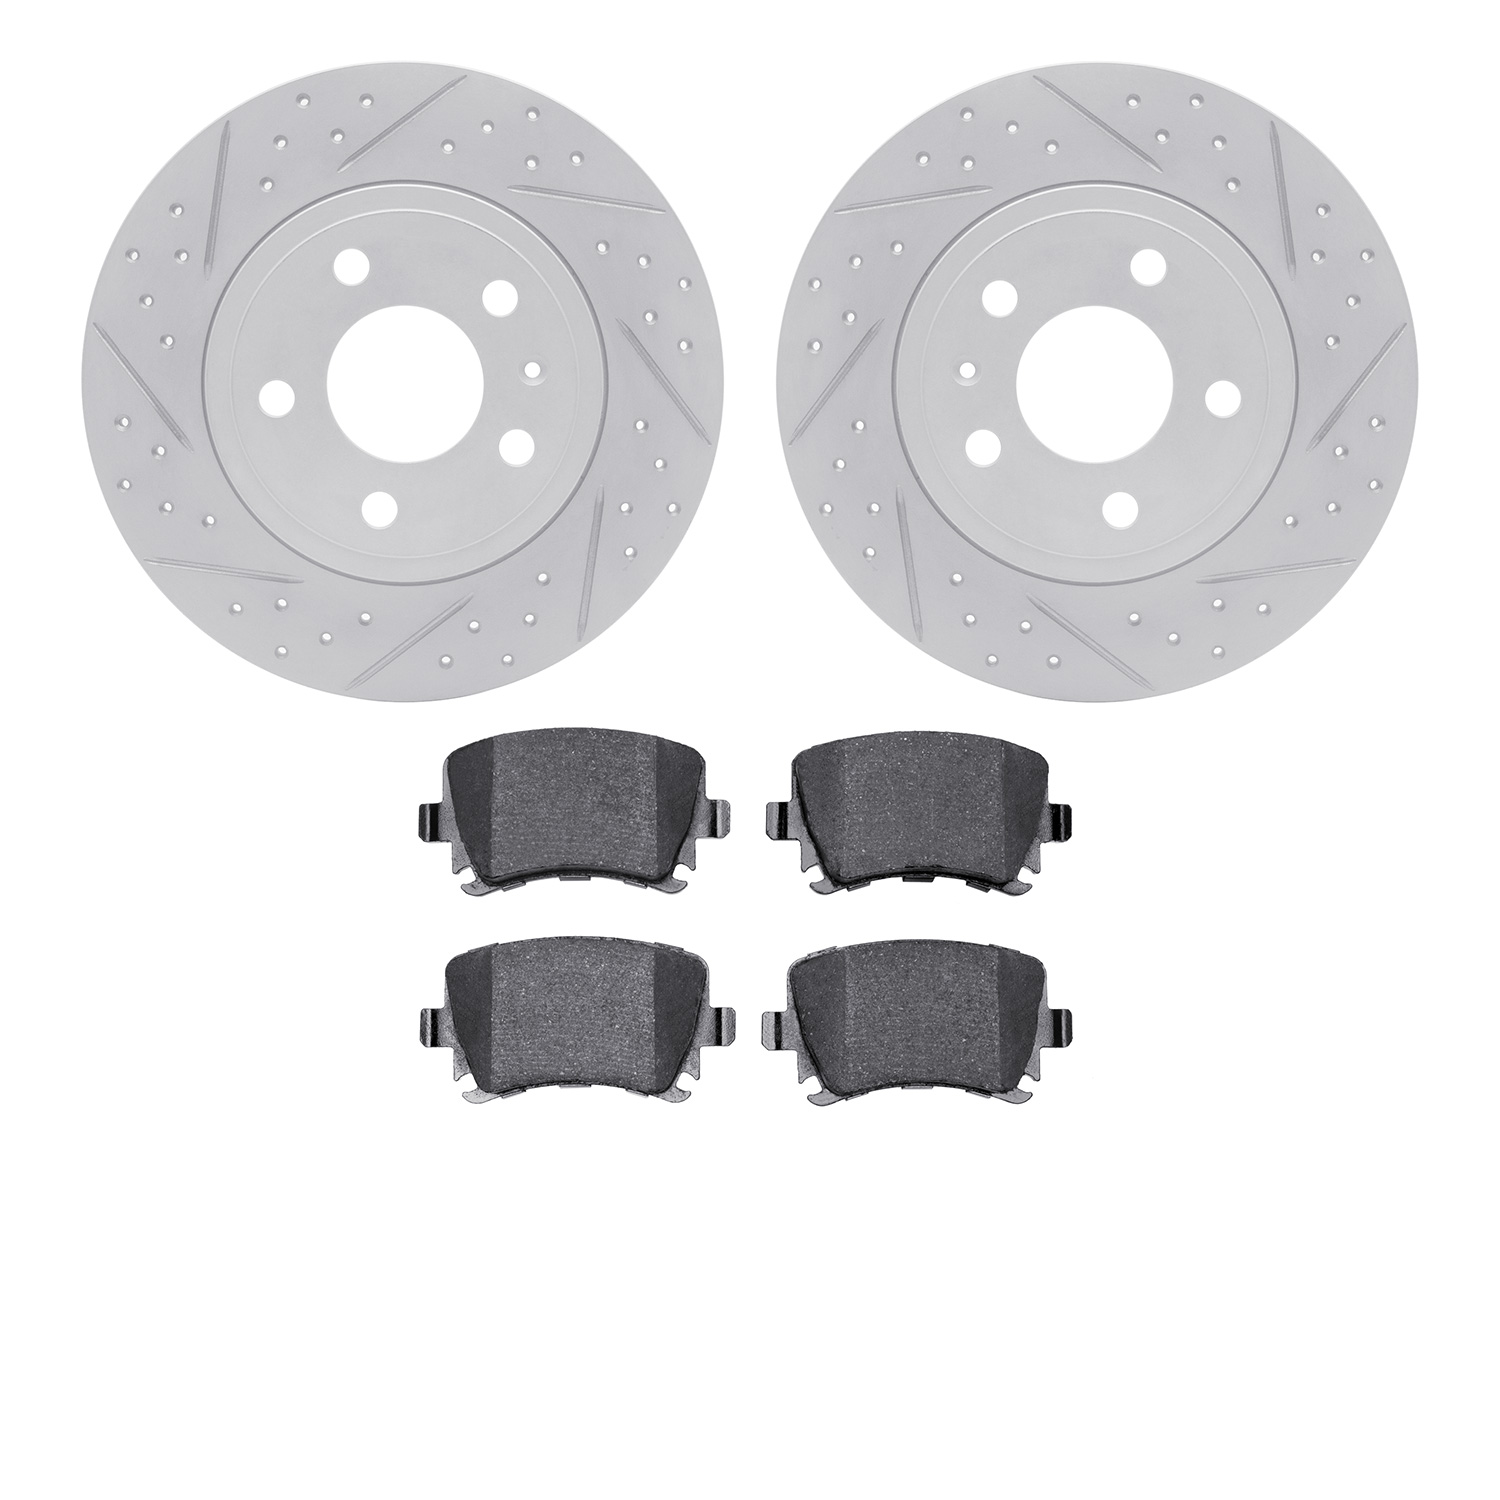 2502-73028 Geoperformance Drilled/Slotted Rotors w/5000 Advanced Brake Pads Kit, 2005-2009 Audi/Volkswagen, Position: Rear